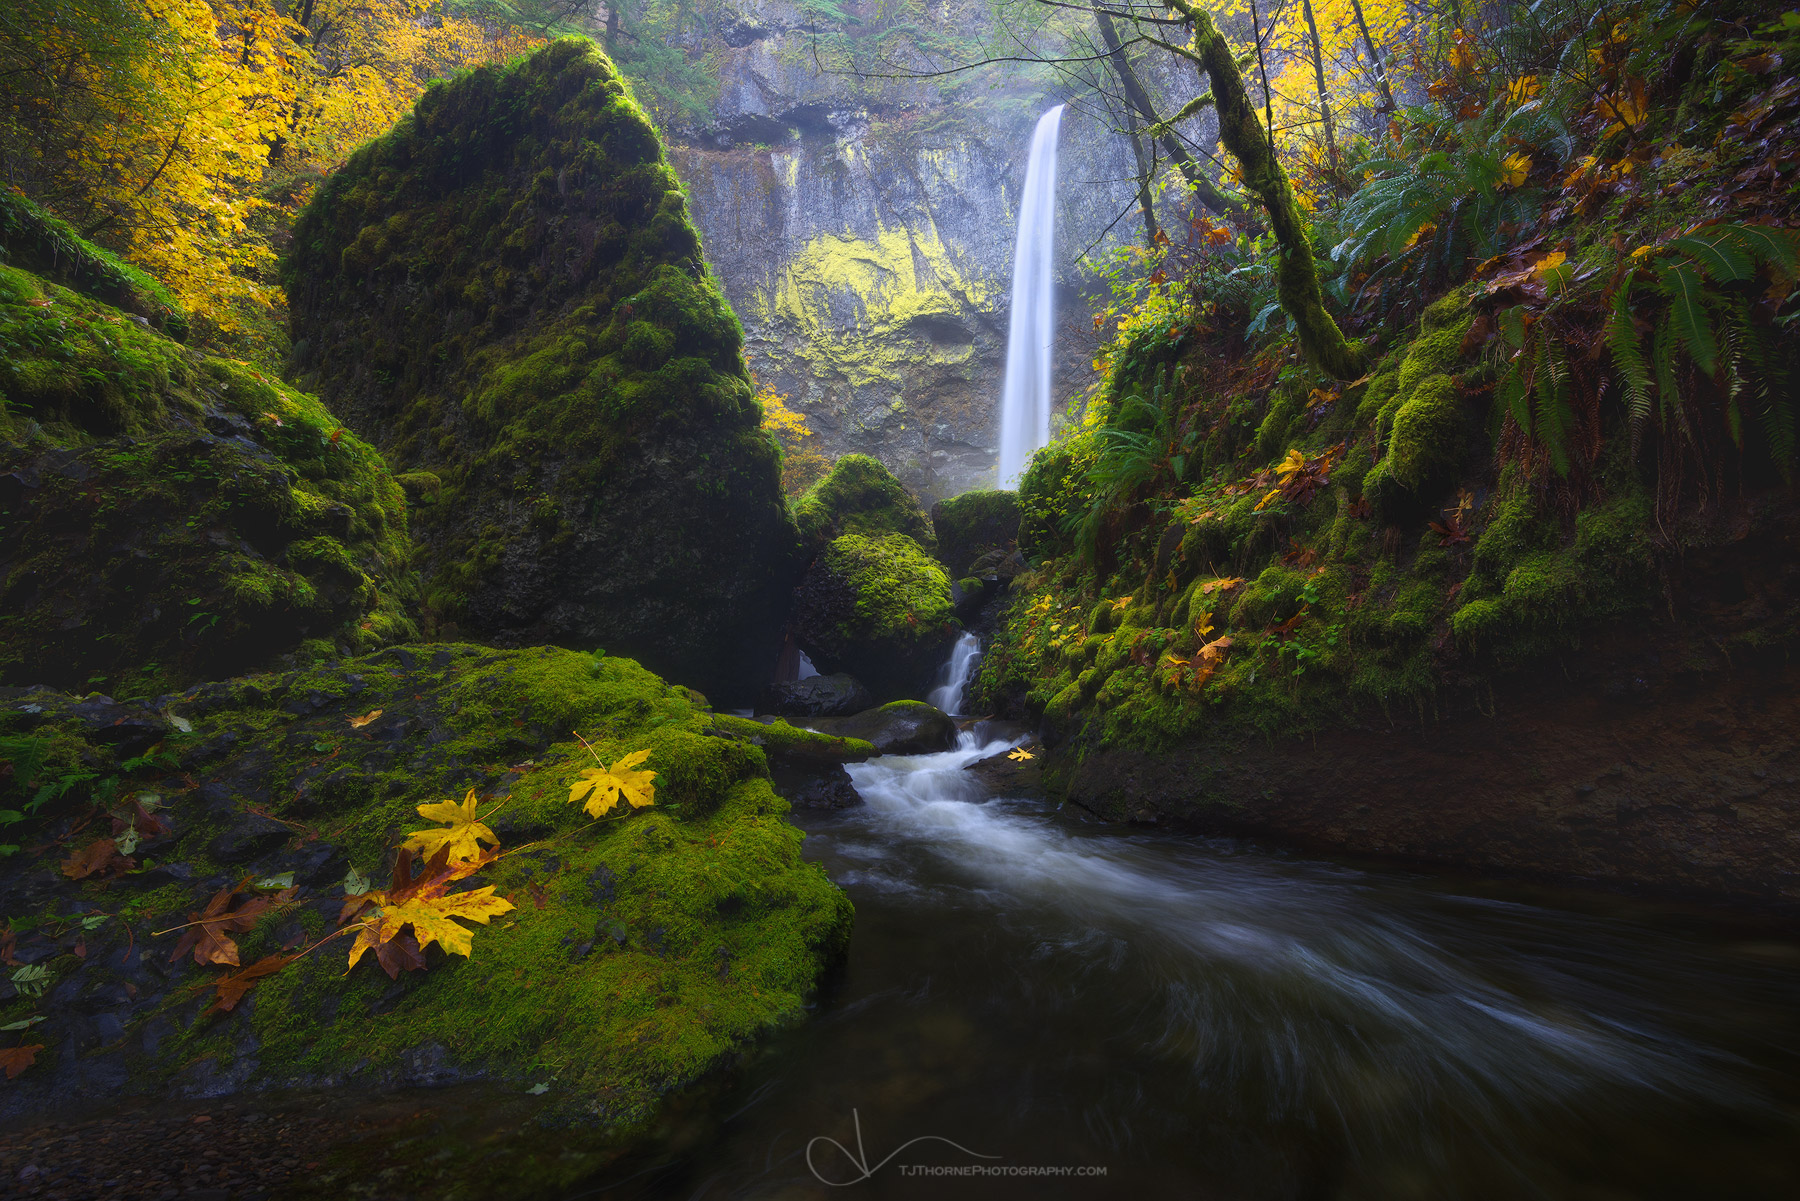 Autumn colors along the creek at Elowah Falls in the Columbia River Gorge, Oregon. If I had to pick one waterfall that I thought...